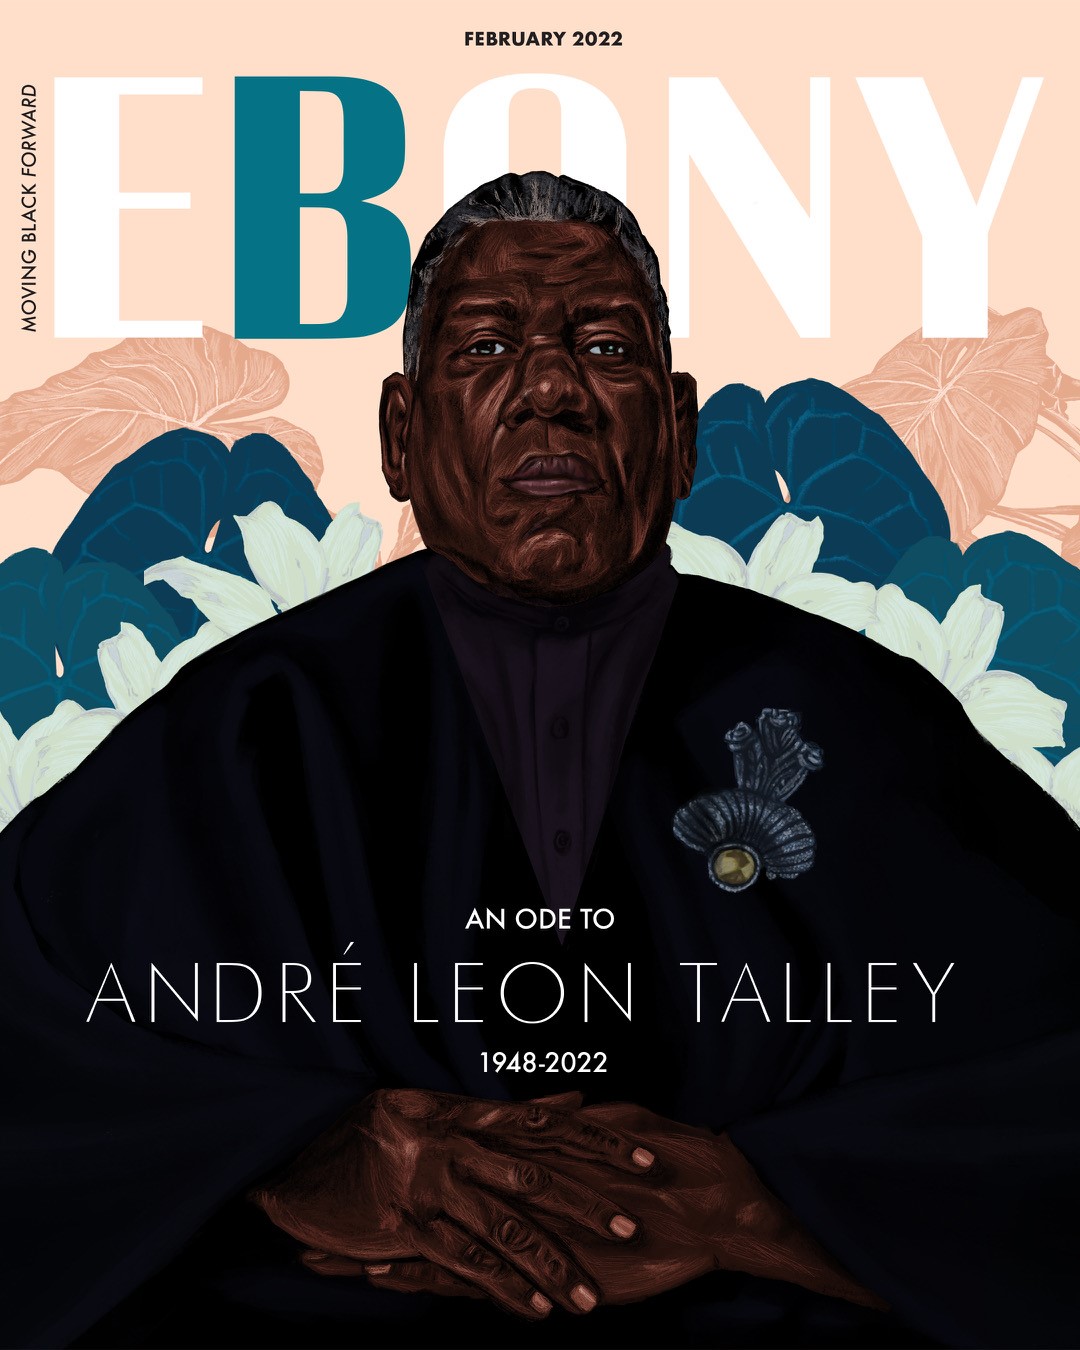 EBONY Honors André Leon Talley with Special Issue, News